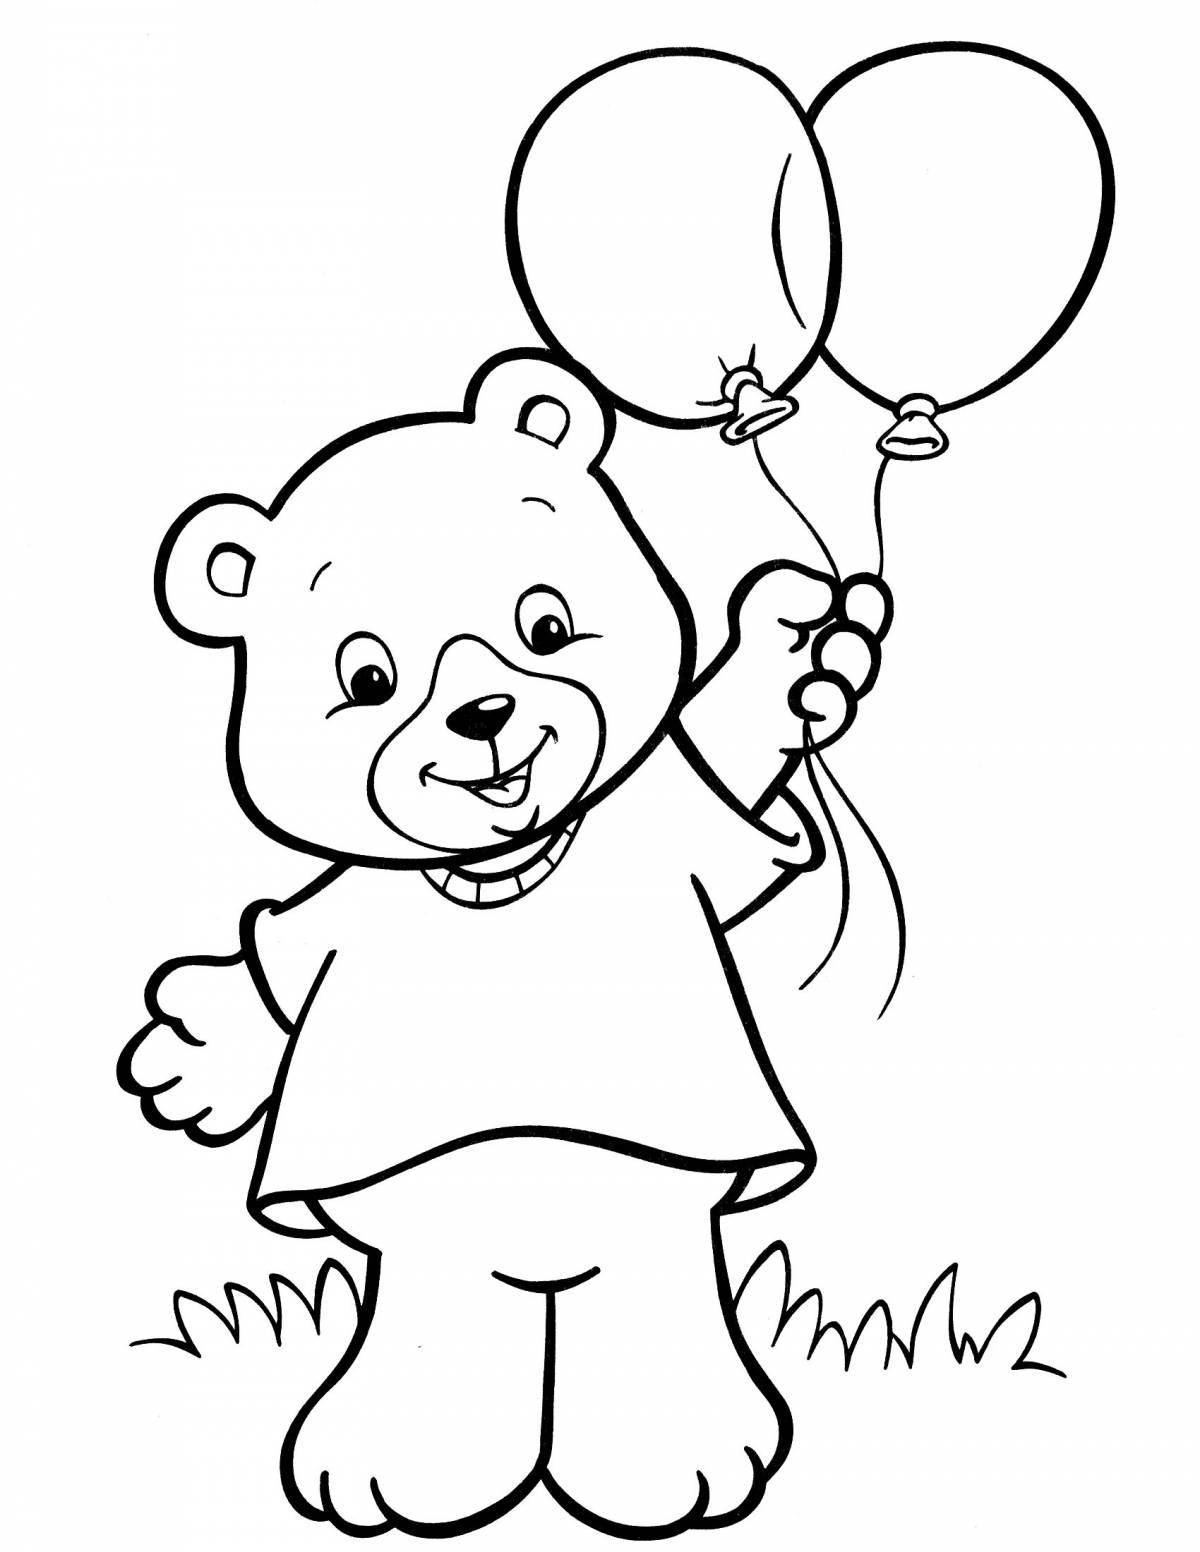 Adorable teddy bear coloring book for 2-3 year olds